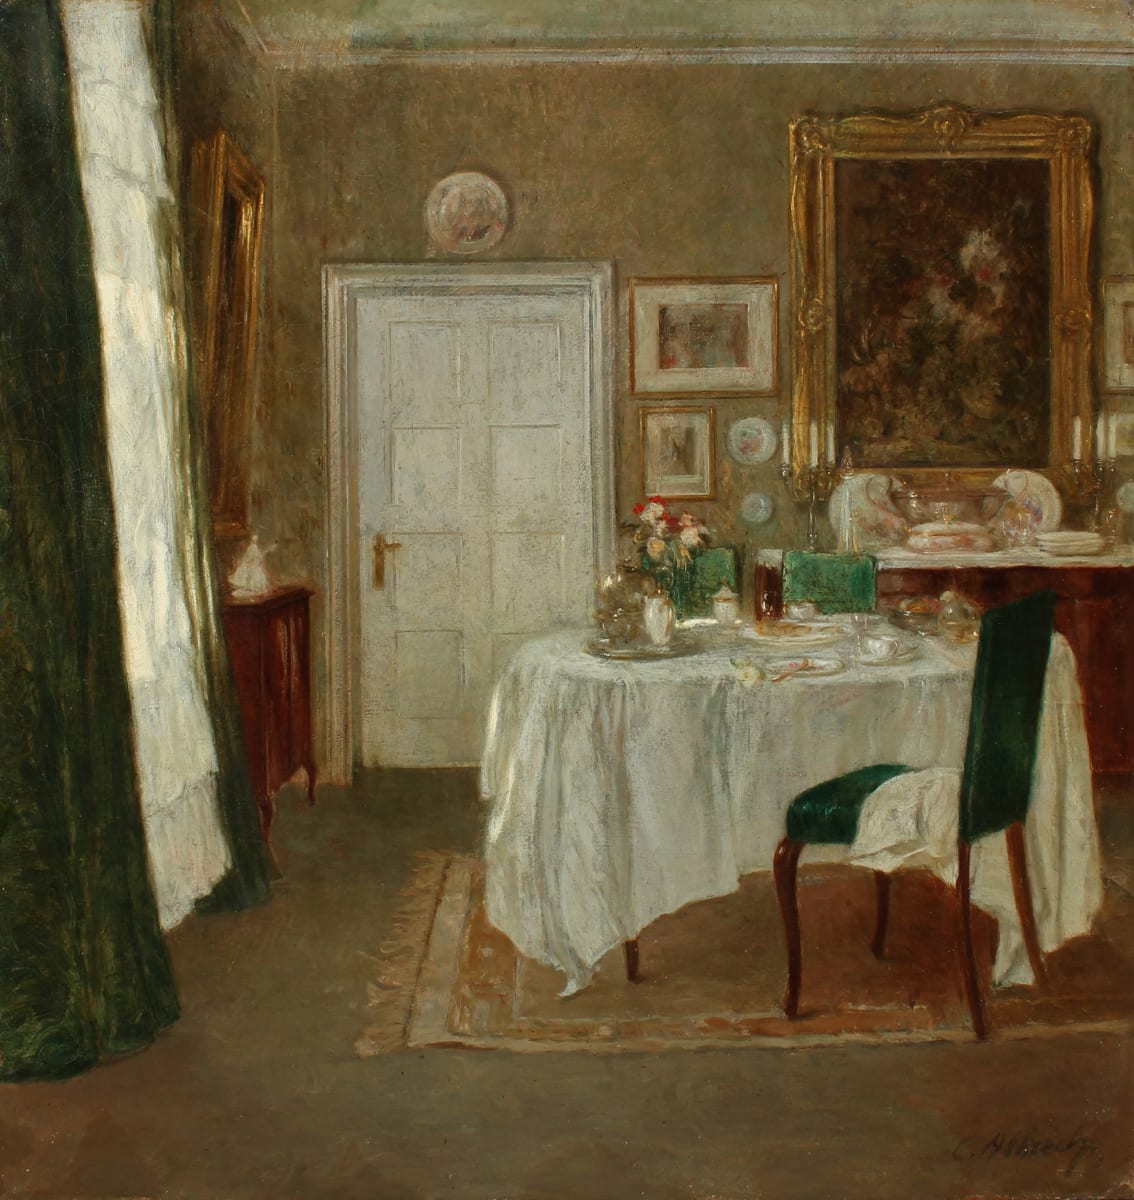 In the Breakfast Room by Carl Albrecht  Image: After conservation.